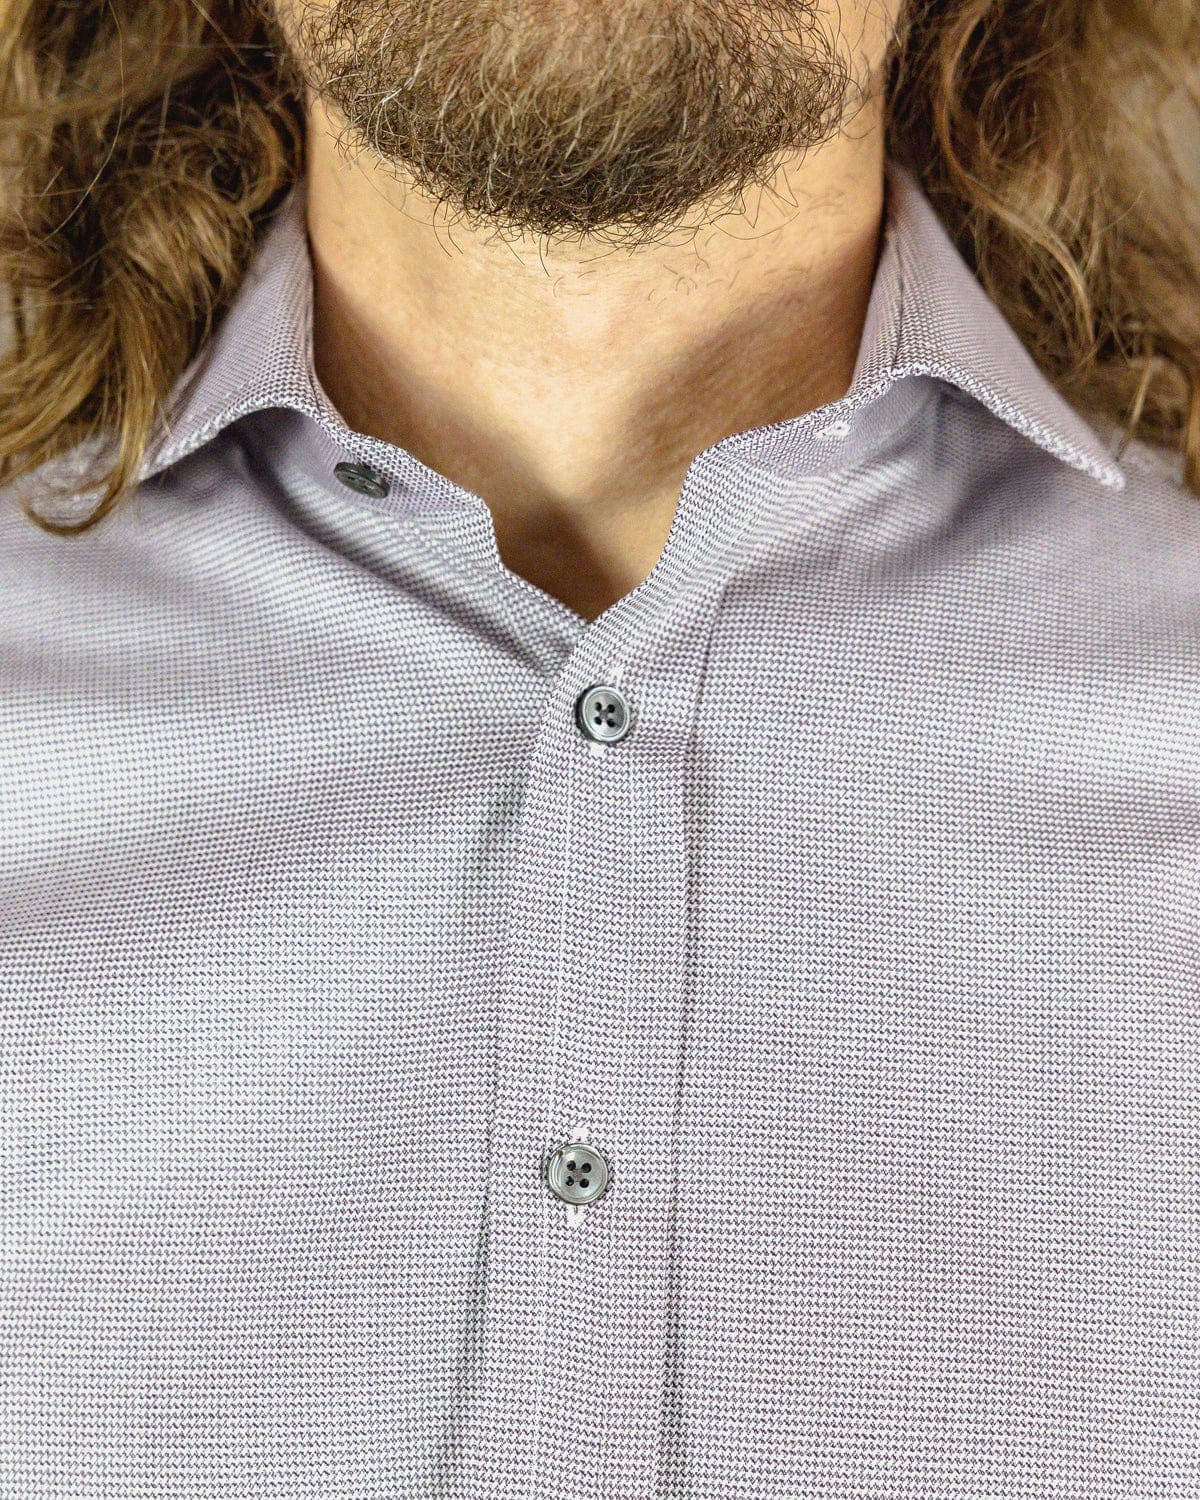 Contemporary Fit, Cut-away Collar, 2 Button Cuff Shirt in a Burgundy & White Checkerboard Twill Cotton